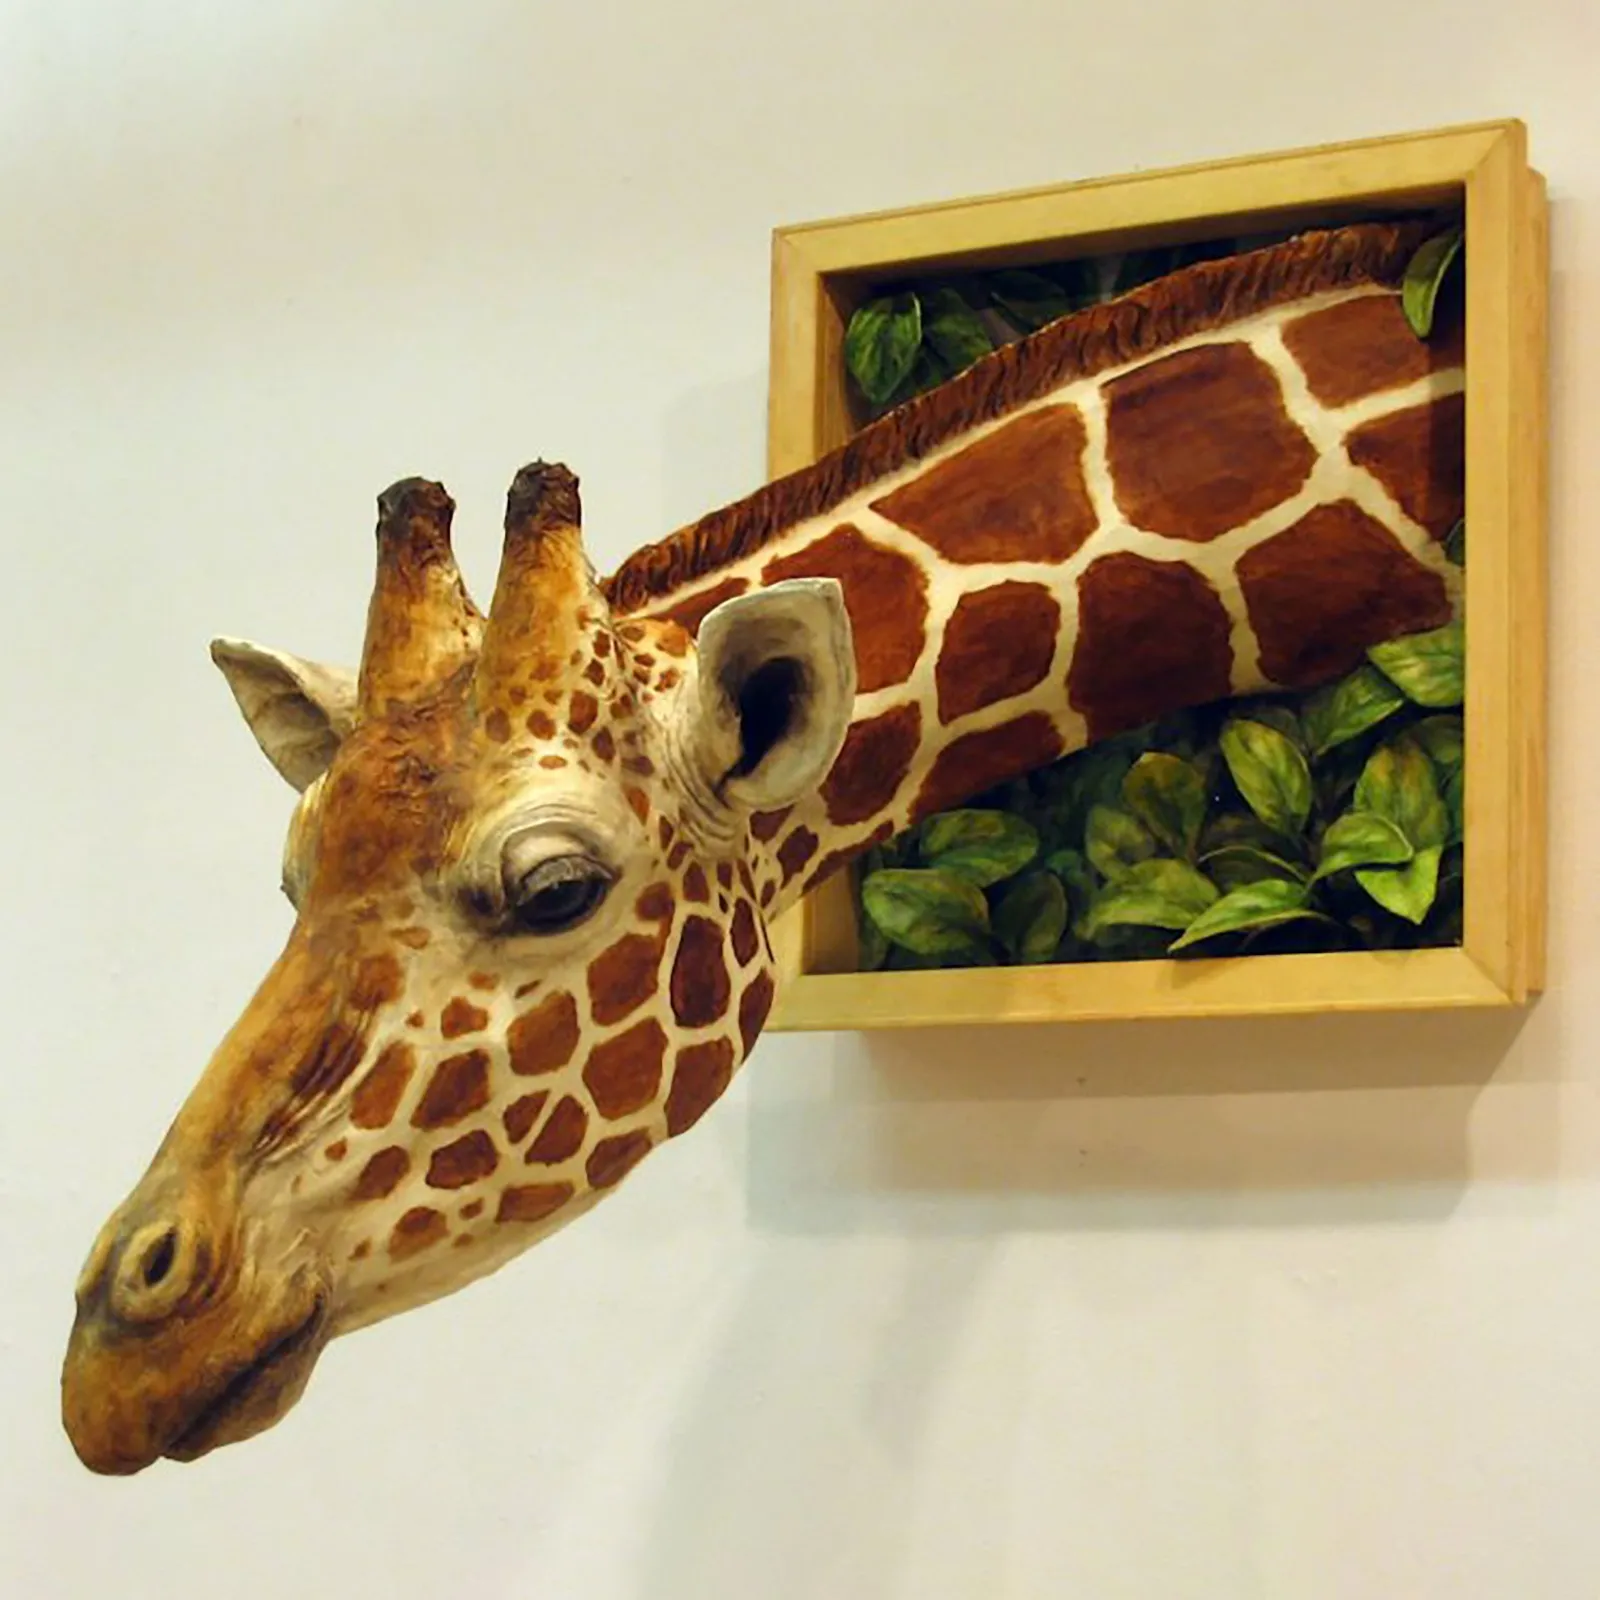 Vintage Wall Mounted Resin Sculpture Giraffe Ornament Hanging Statue Home Decor 